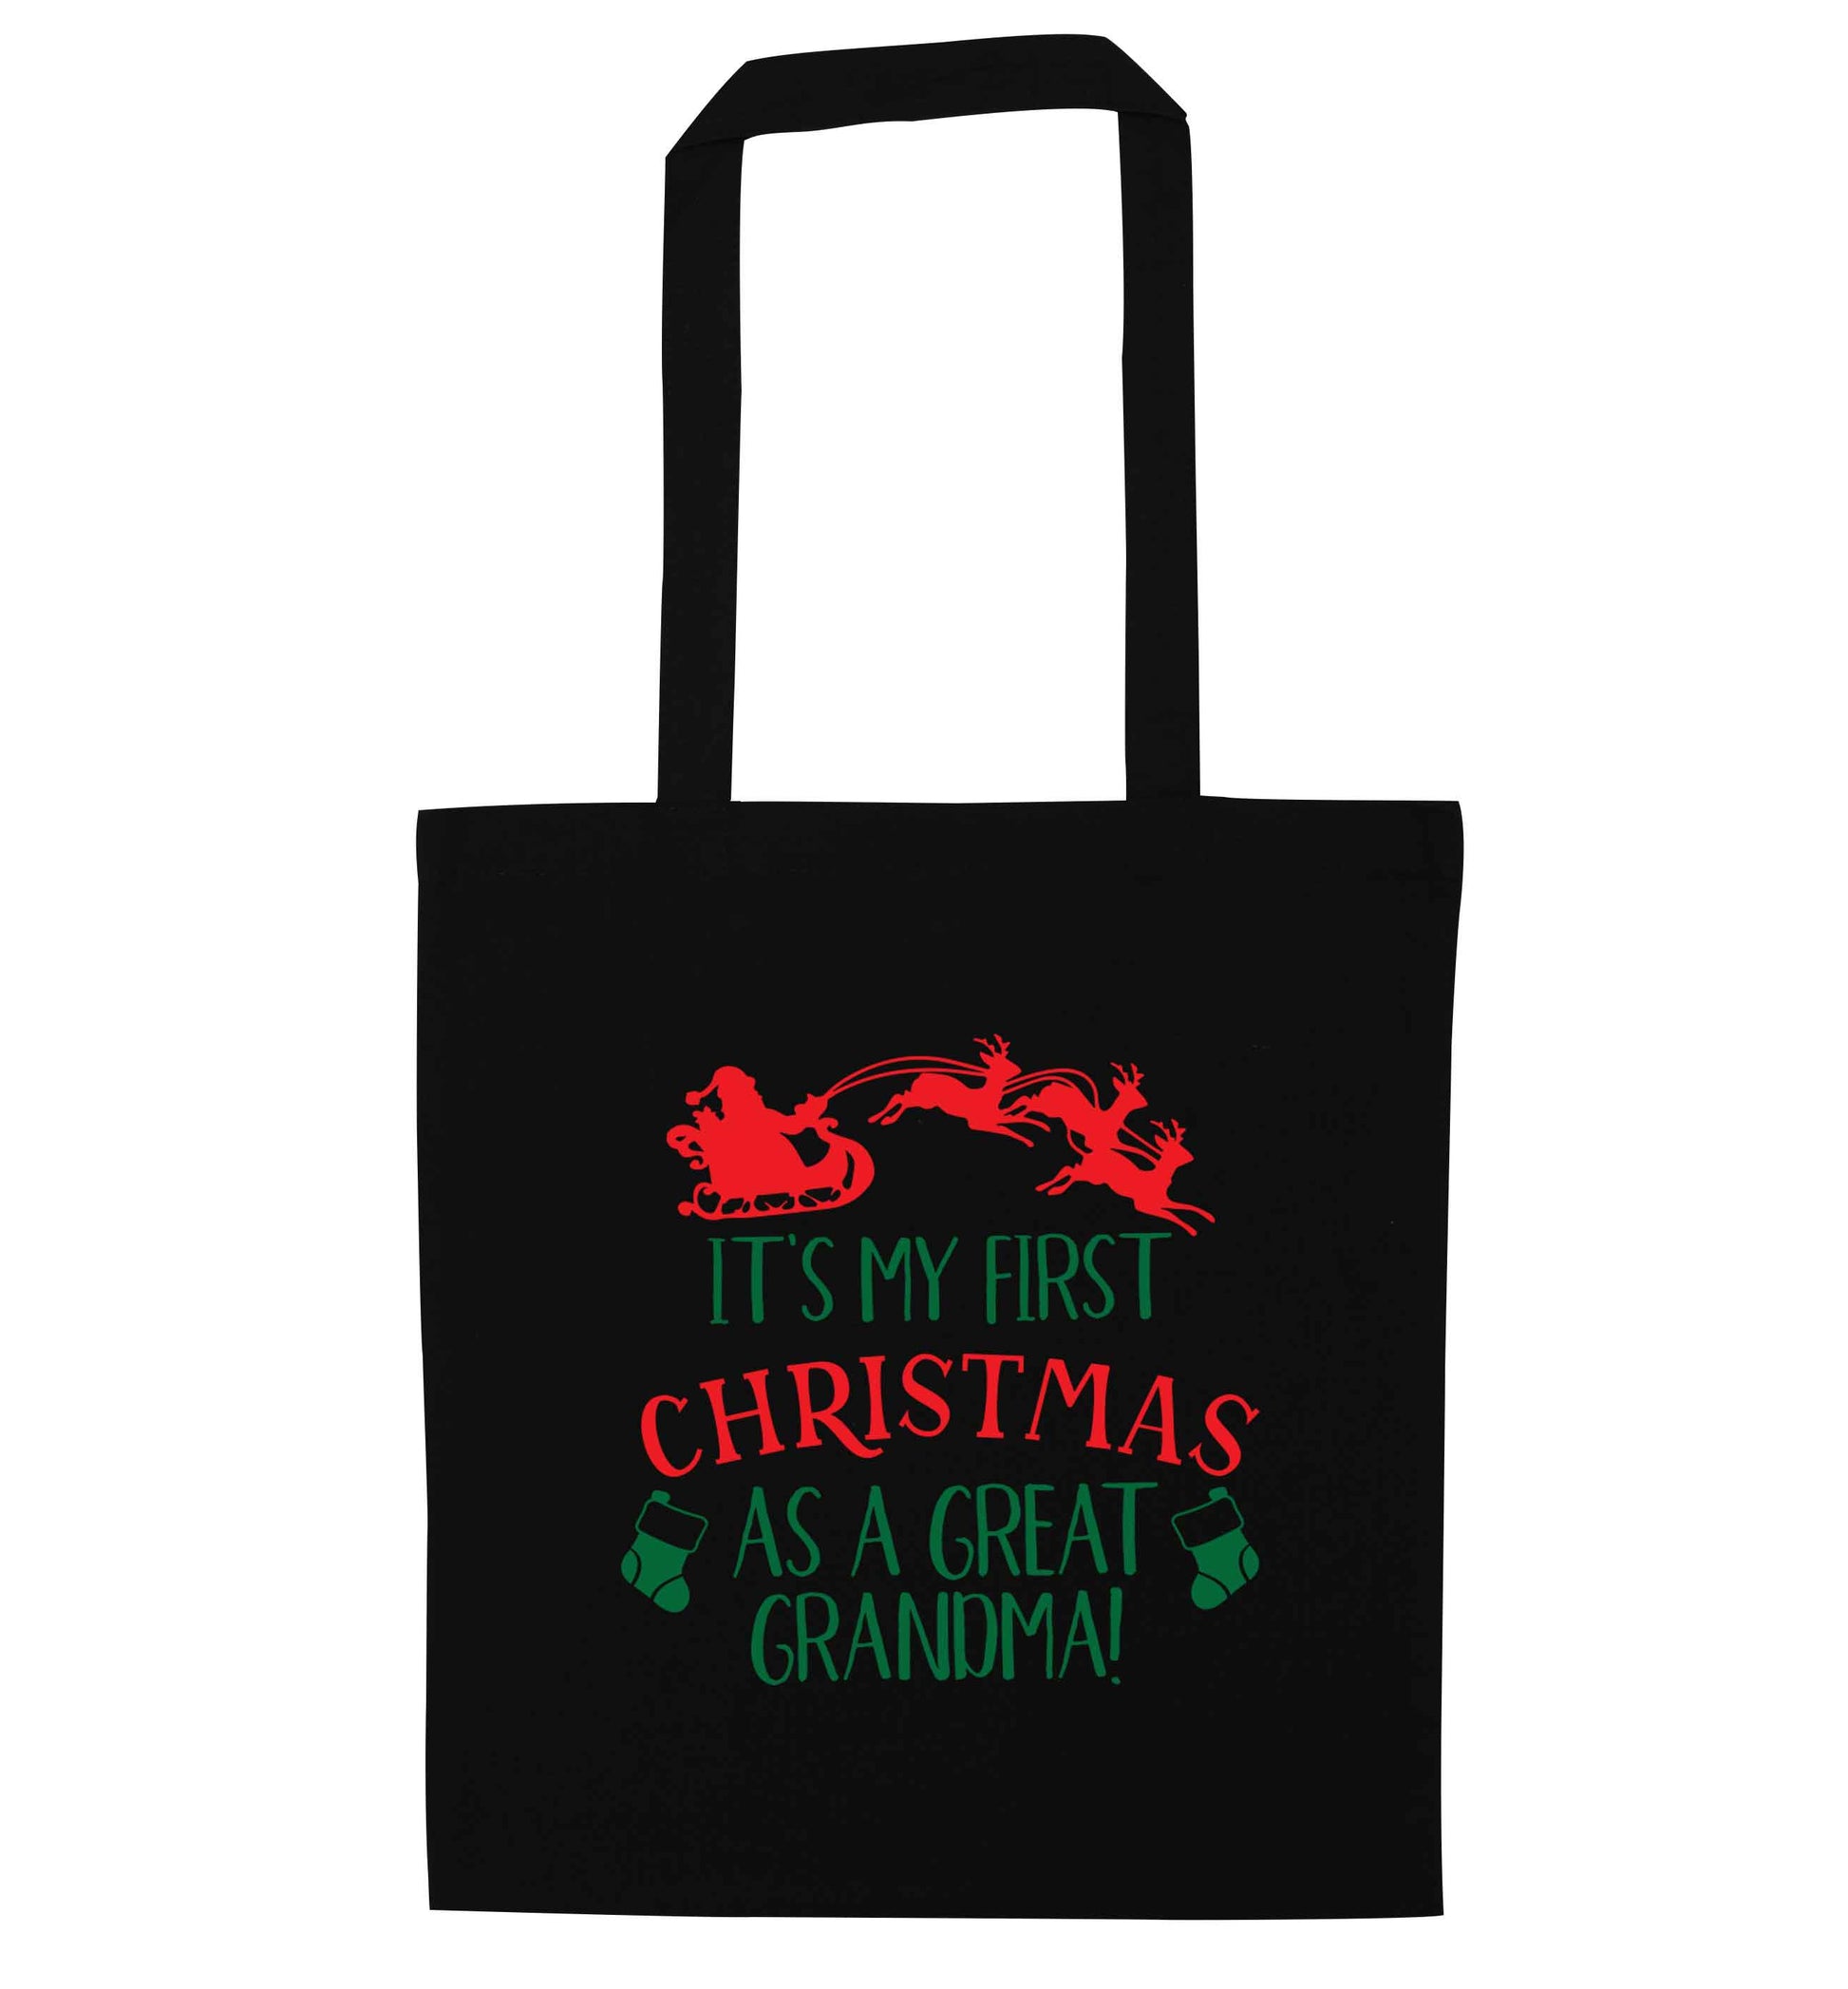 It's my first Christmas as a great grandma! black tote bag